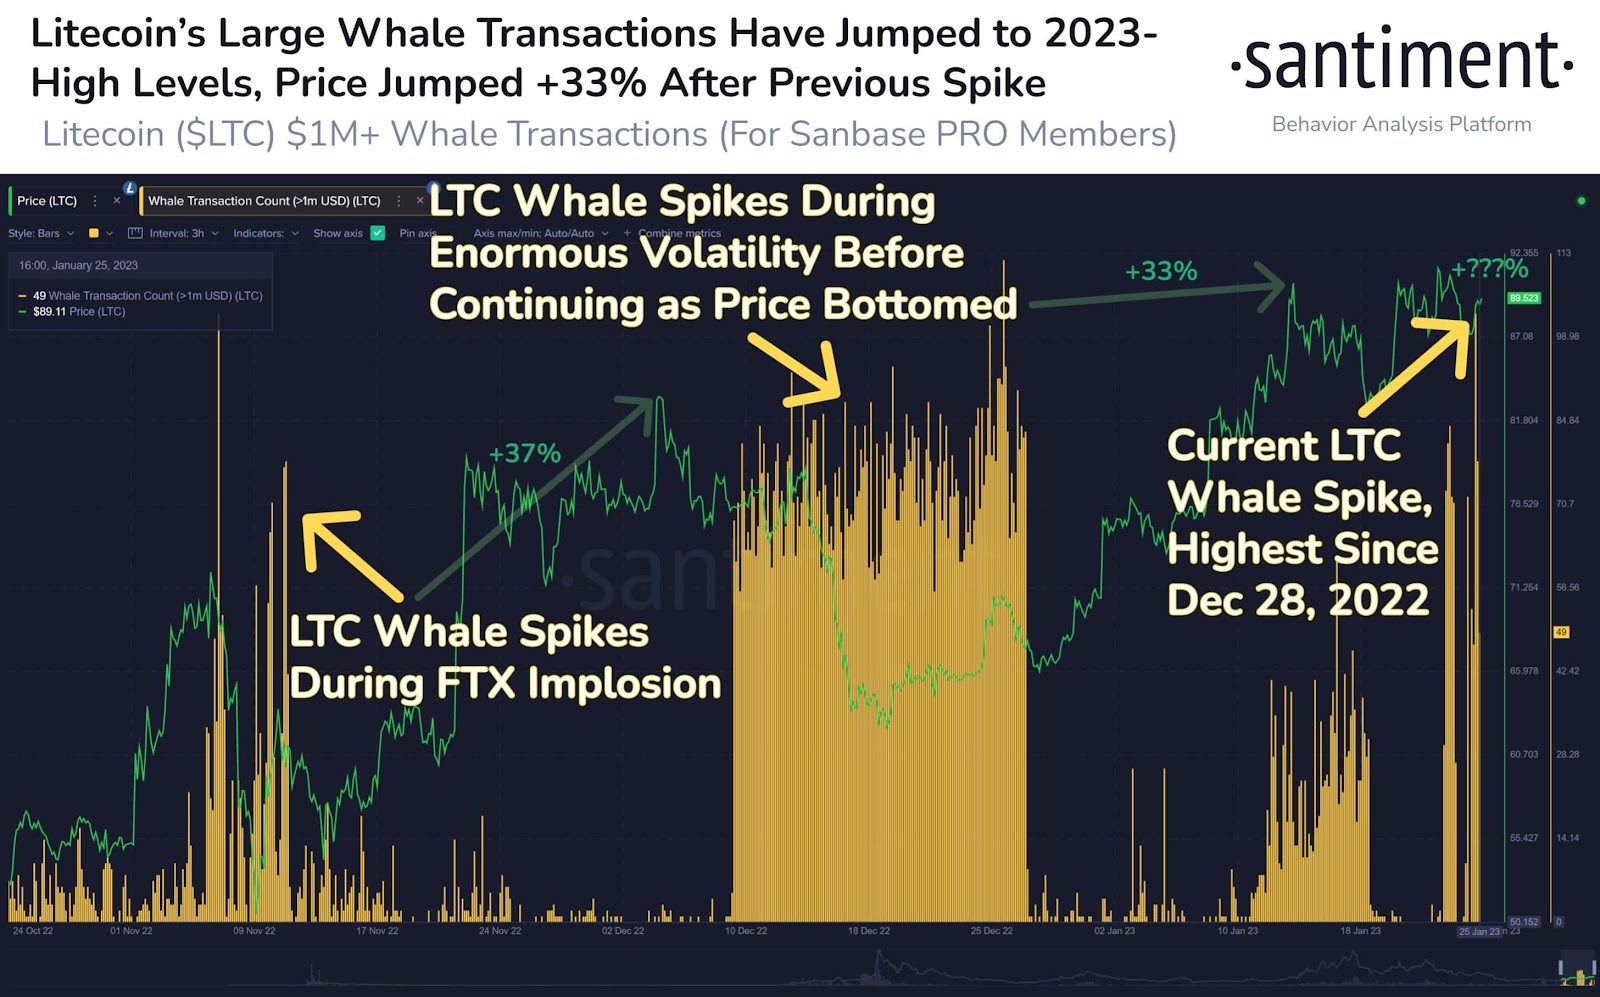 Massive Whale Transactions Spotted on Litecoin and dYdX? Massive Rally On Horizon?